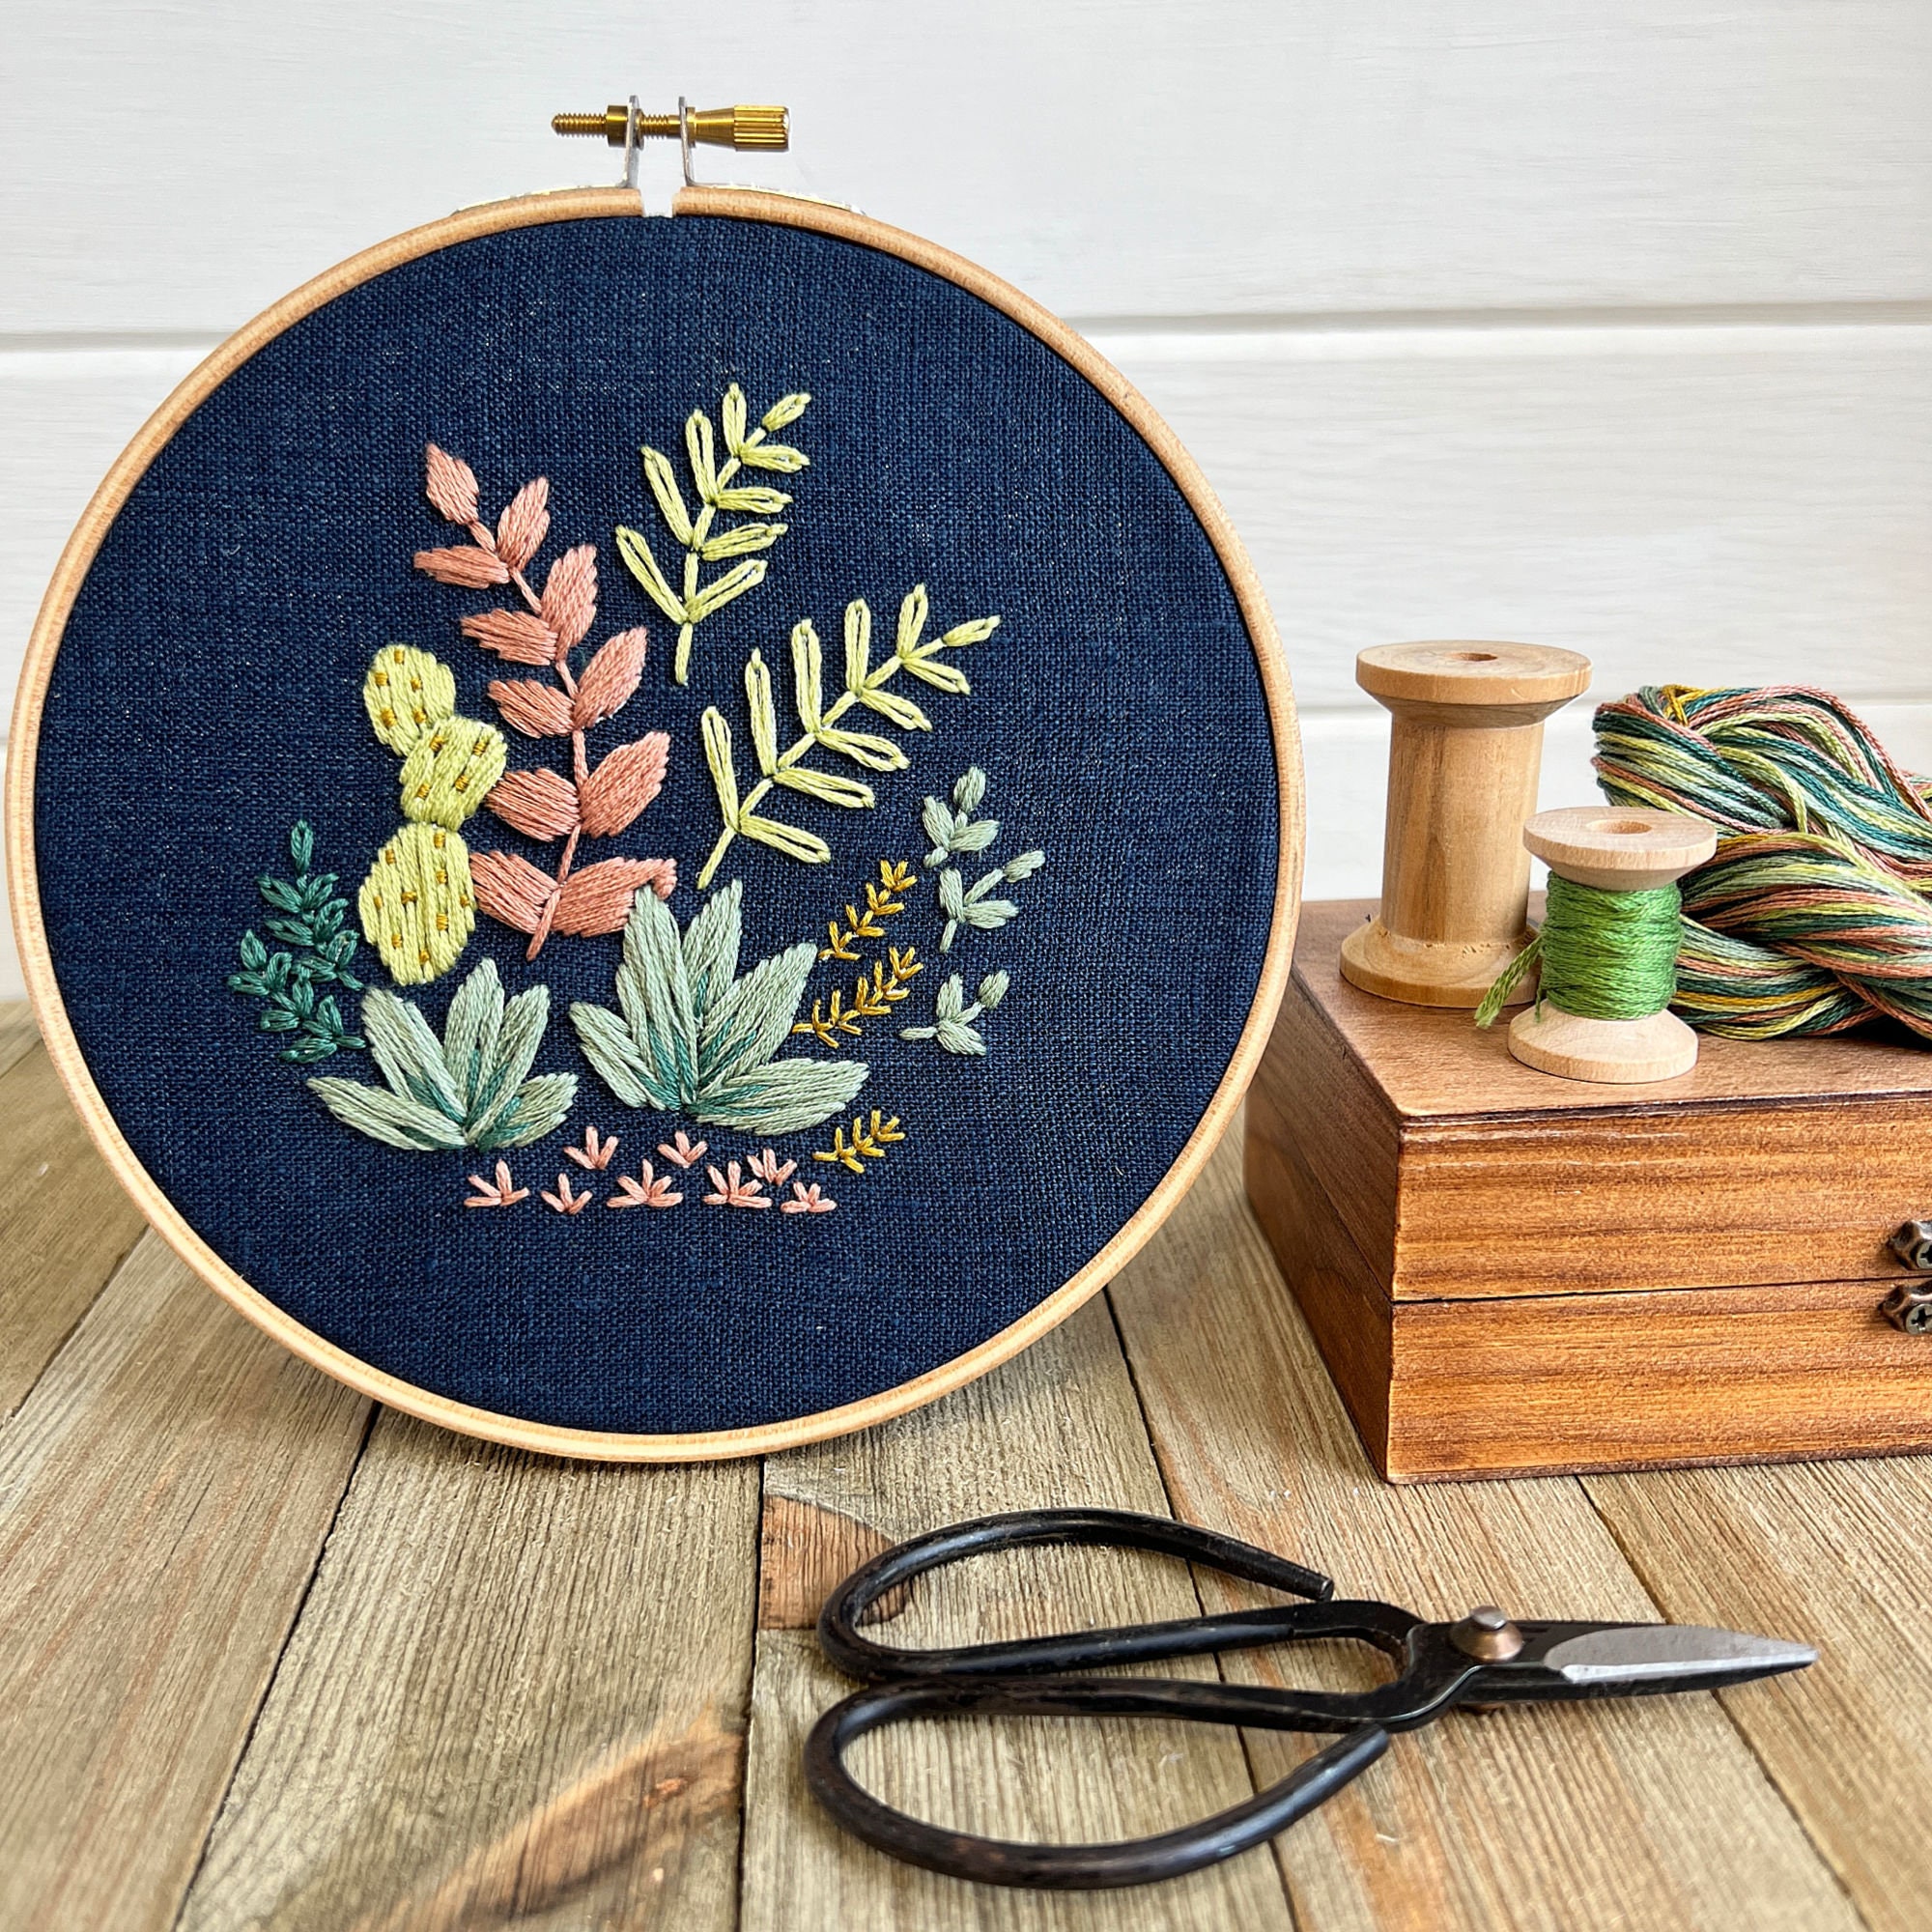 Setting Up An Embroidery Kit — Life in the Little